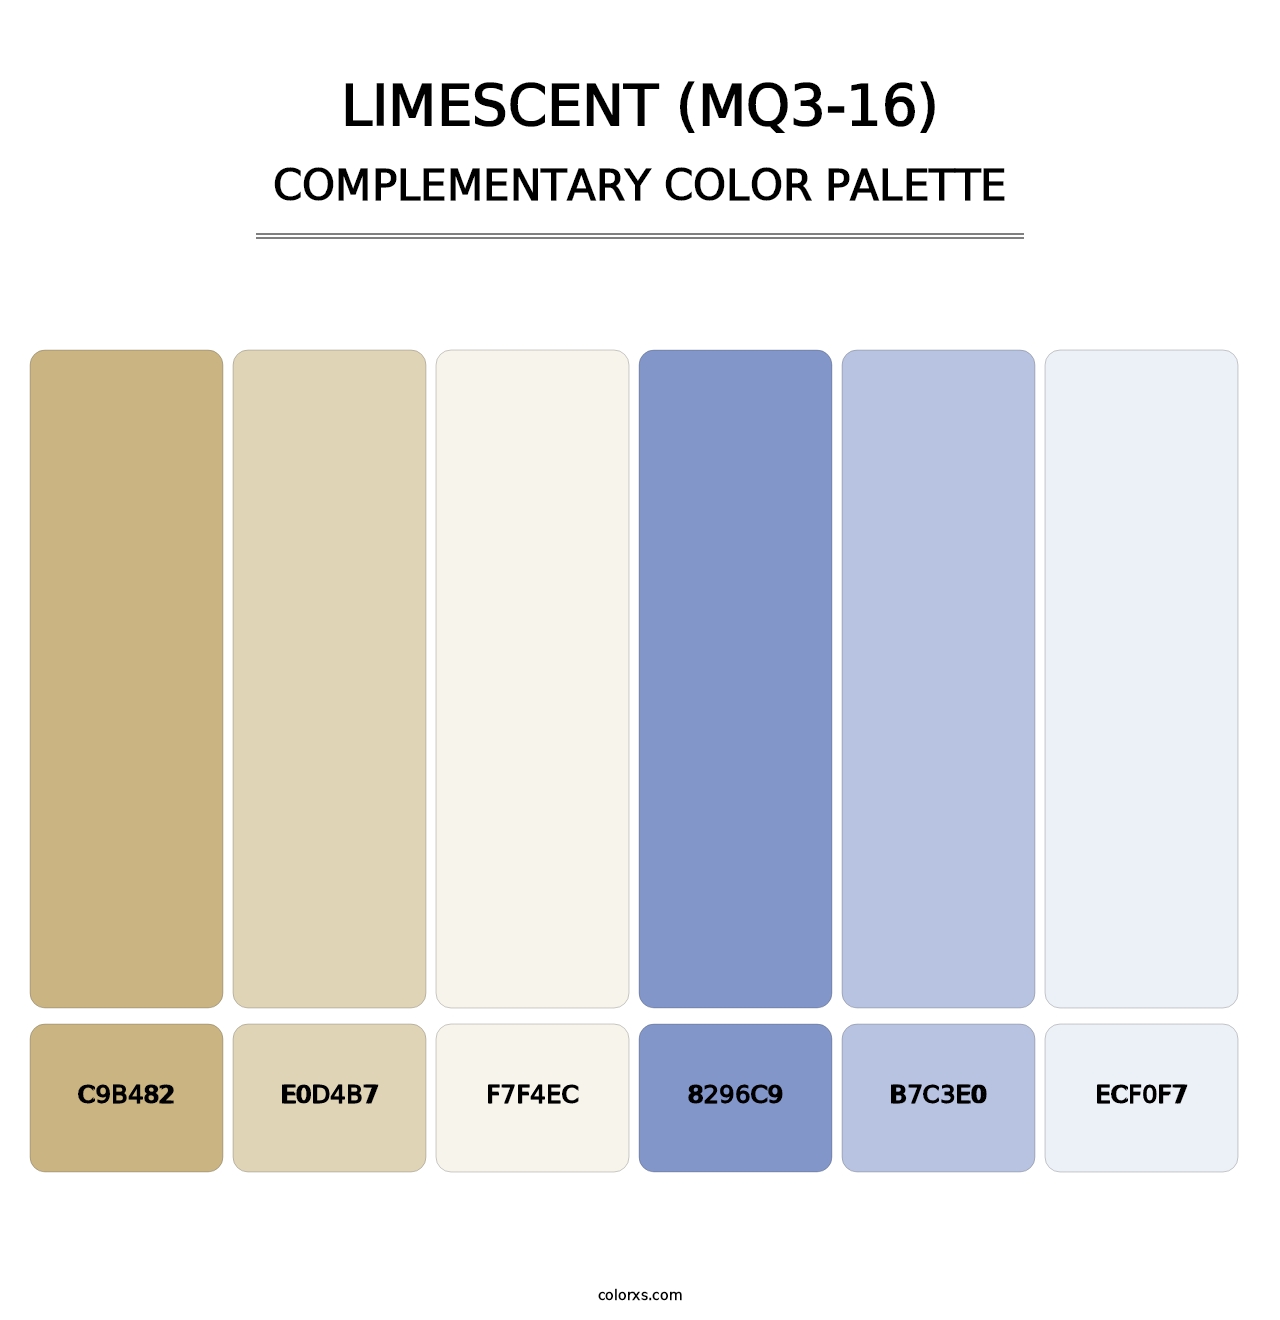 Limescent (MQ3-16) - Complementary Color Palette